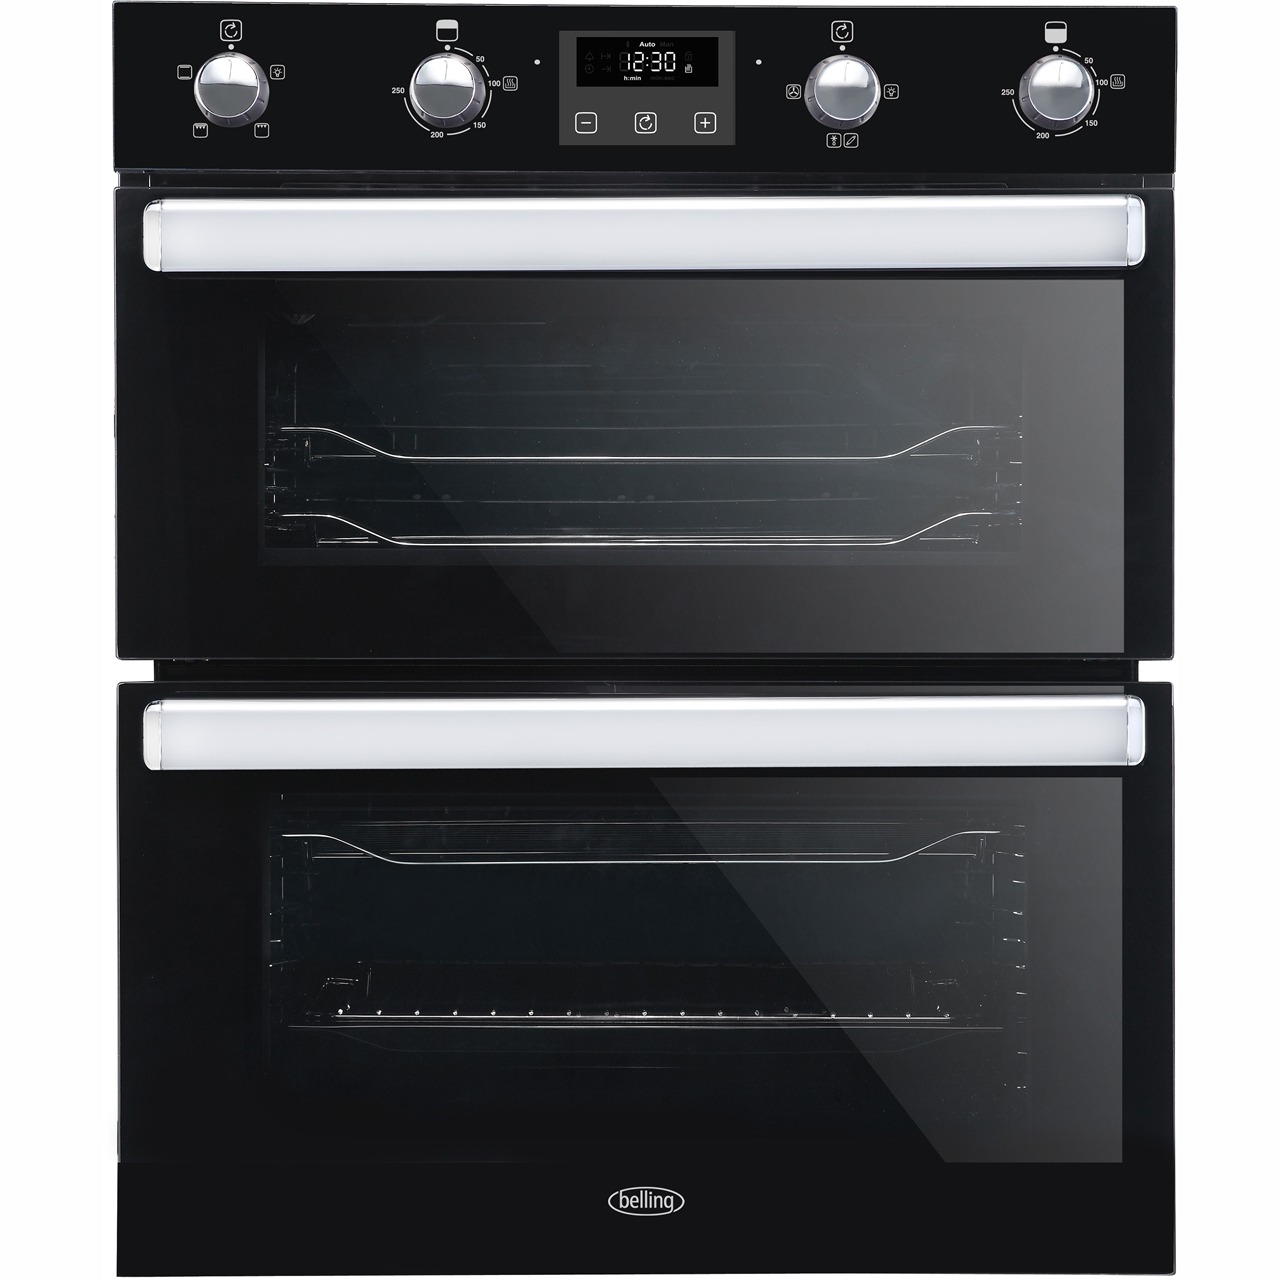 Belling BI702FPCT Built Under Electric Double Oven - Black - A/A Rated, Black